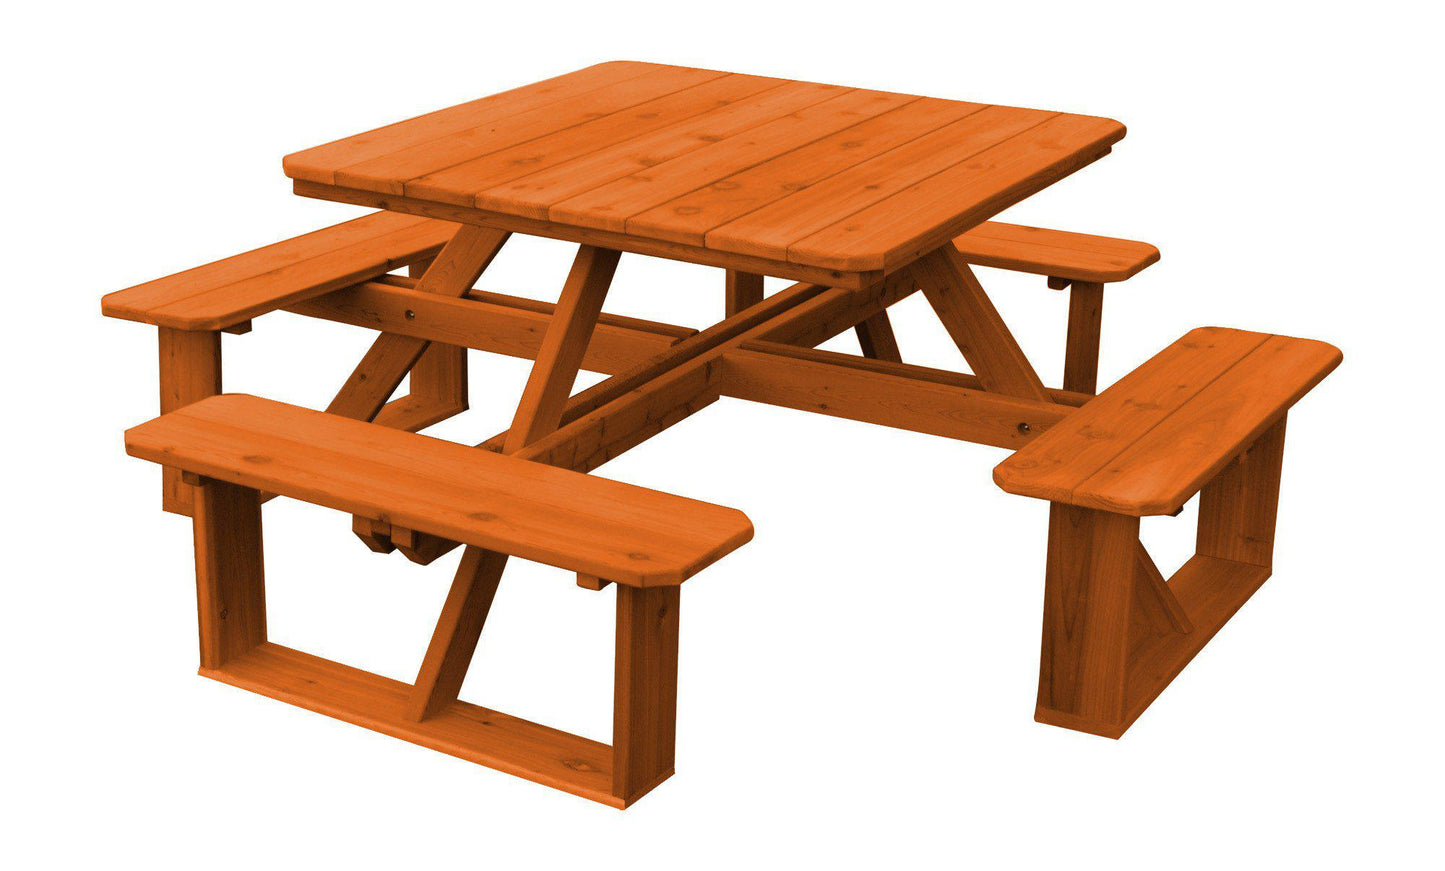 Regallion Outdoor Western Red Cedar 44"  Square Walk-In Table- Specify for FREE 2" Umbrella Hole - LEAD TIME TO SHIP 2 WEEKS